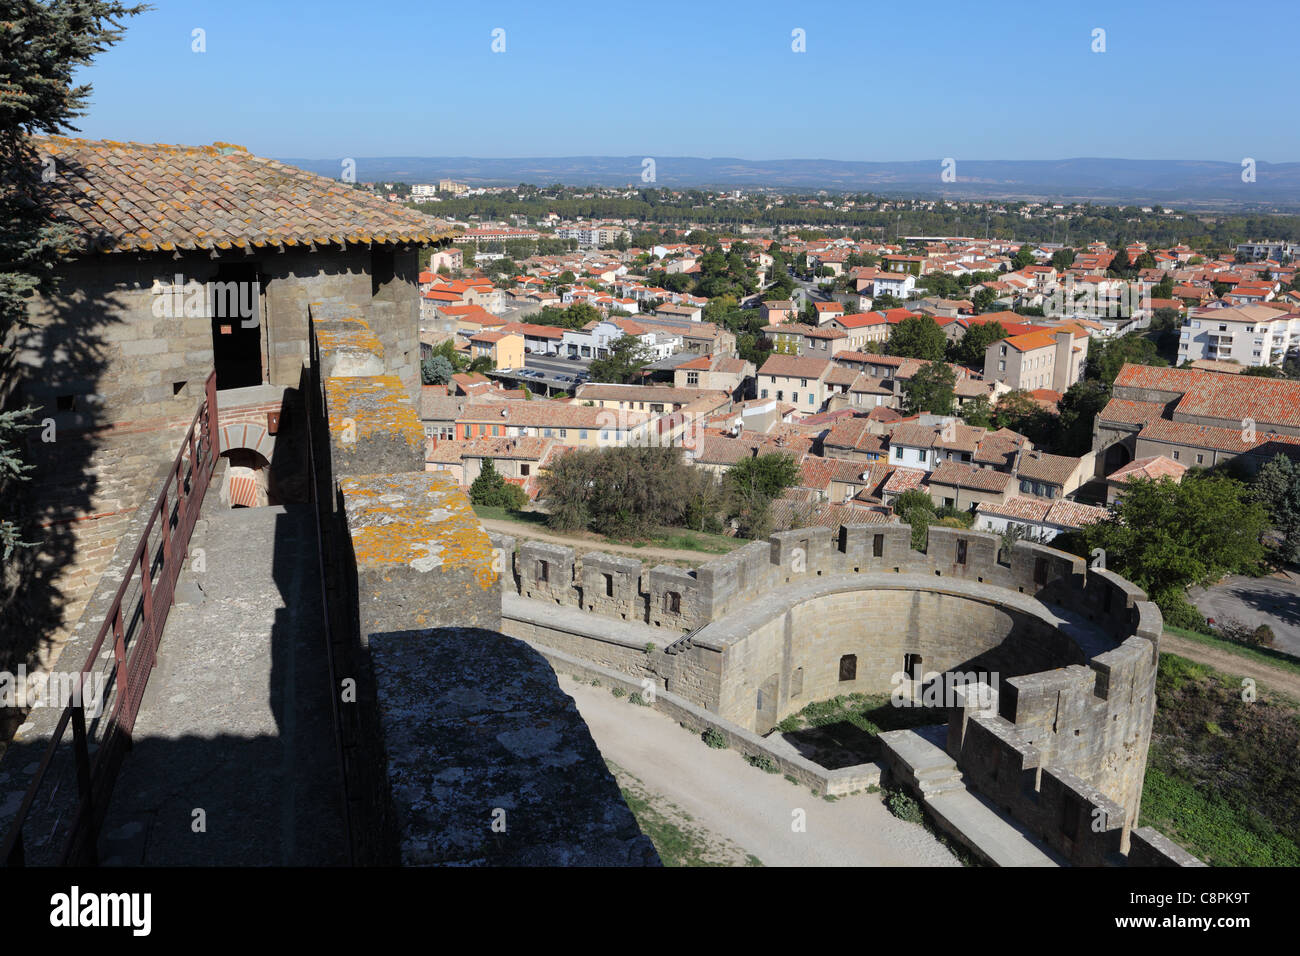 View of the city of Carcassonne, France Stock Photo